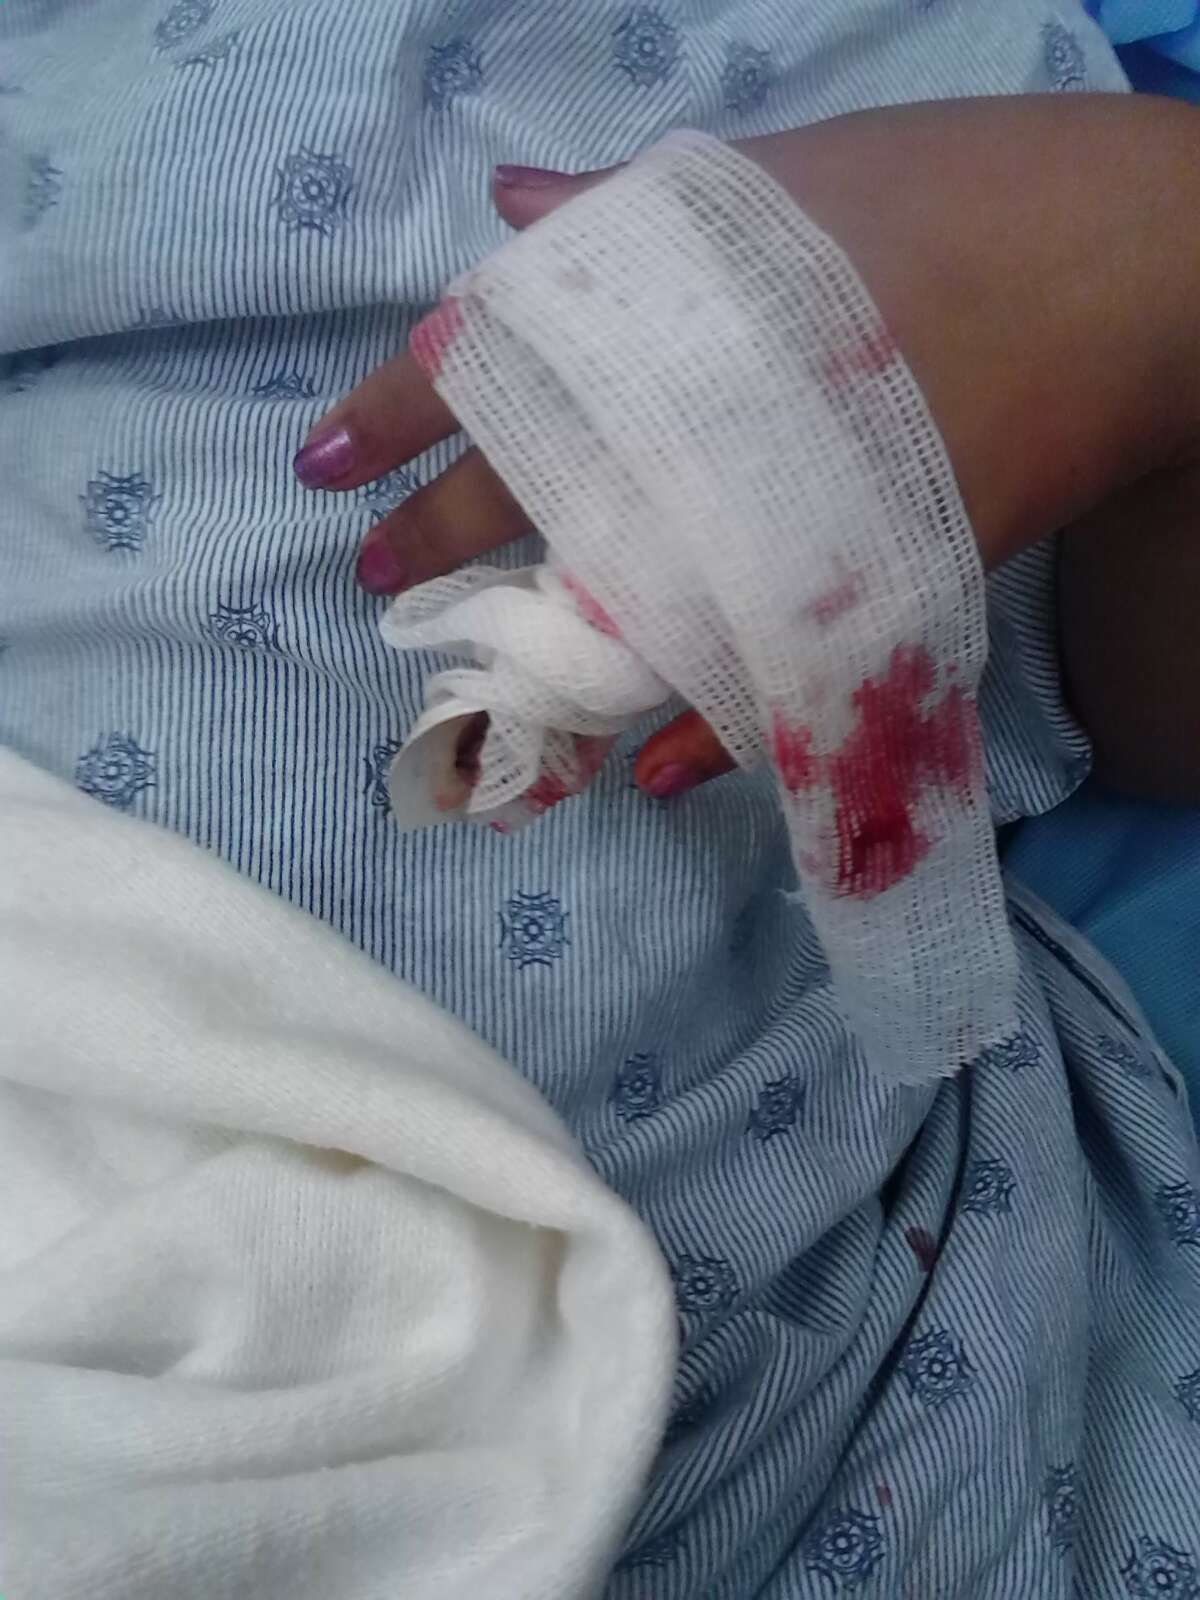 Desiree Zertuche had to have pins and stitches put into her hand after a dog bit her, breaking three bones in her ring finger.